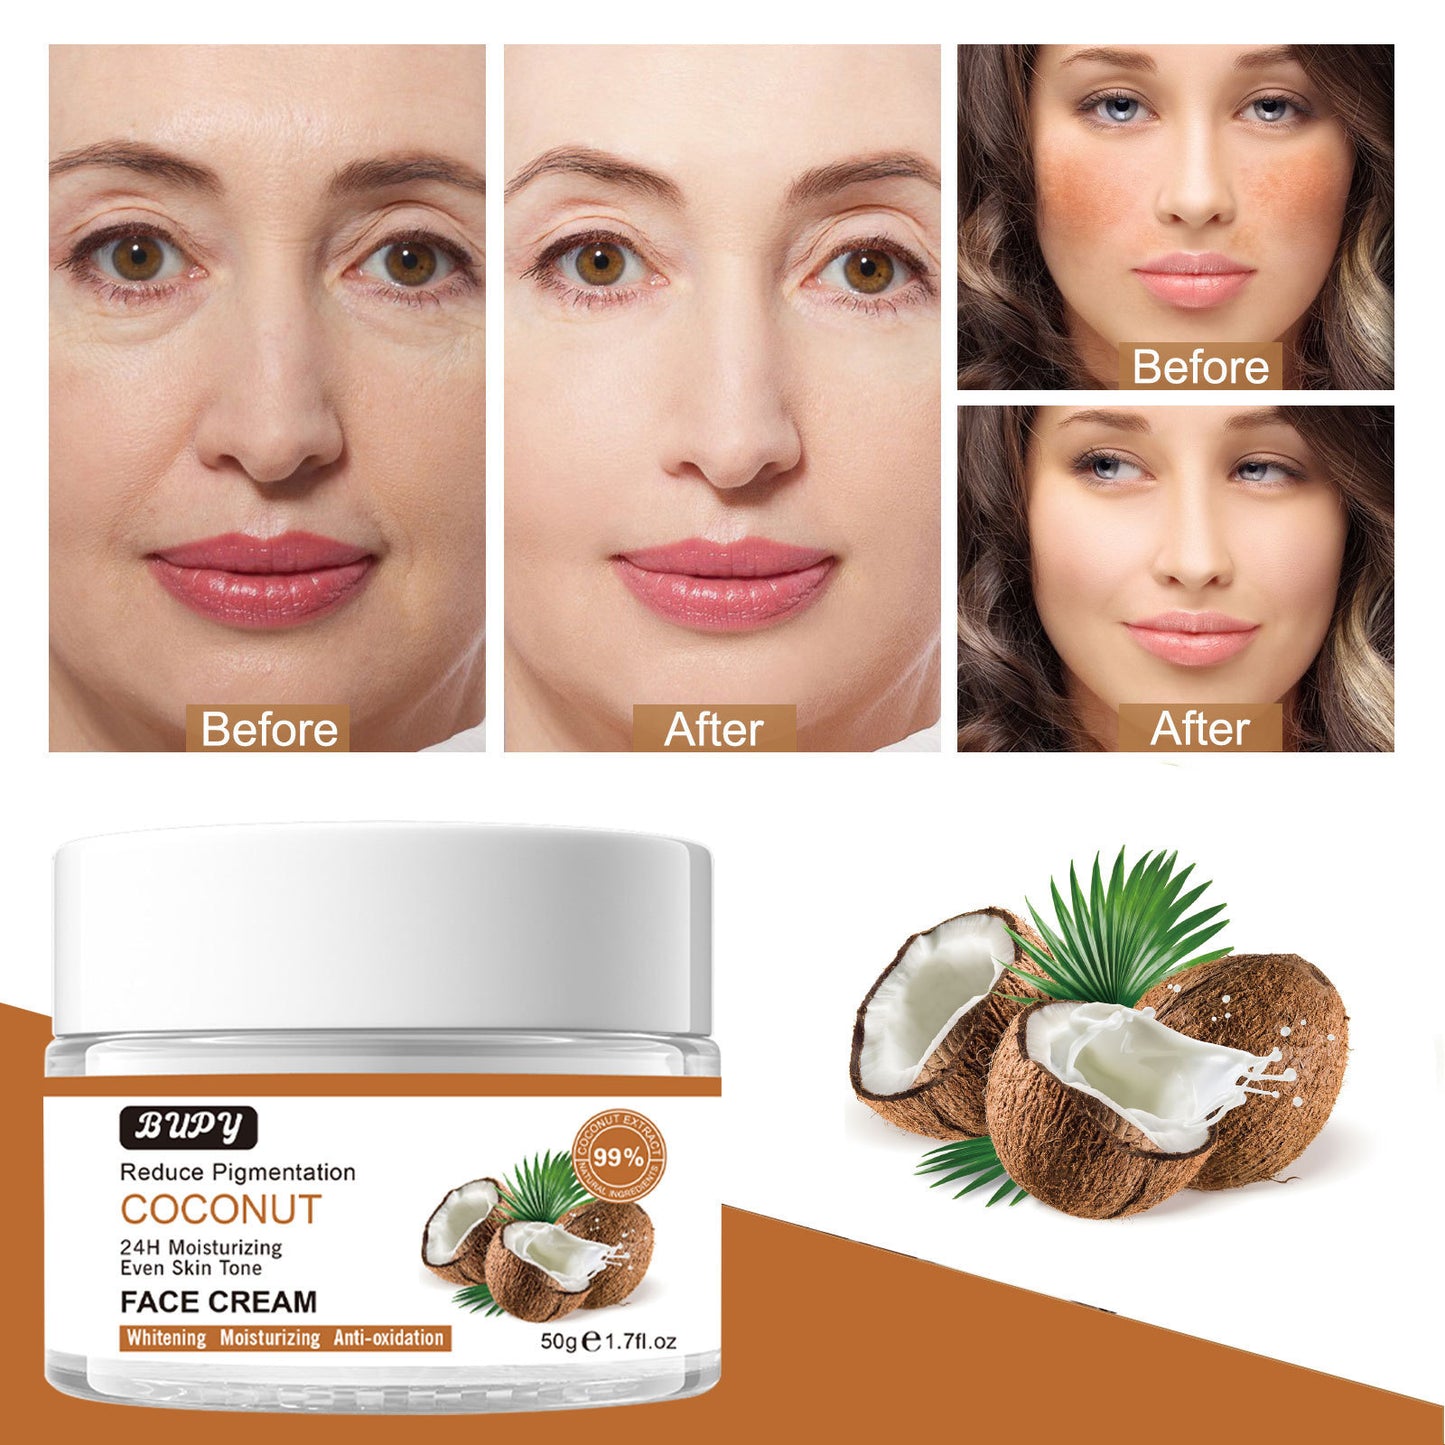 OEM Wholesale Coconut Face Cream, Facial Firming, Whitening, Fade Fine Lines, Anti-aging, Moisturized Cream 319